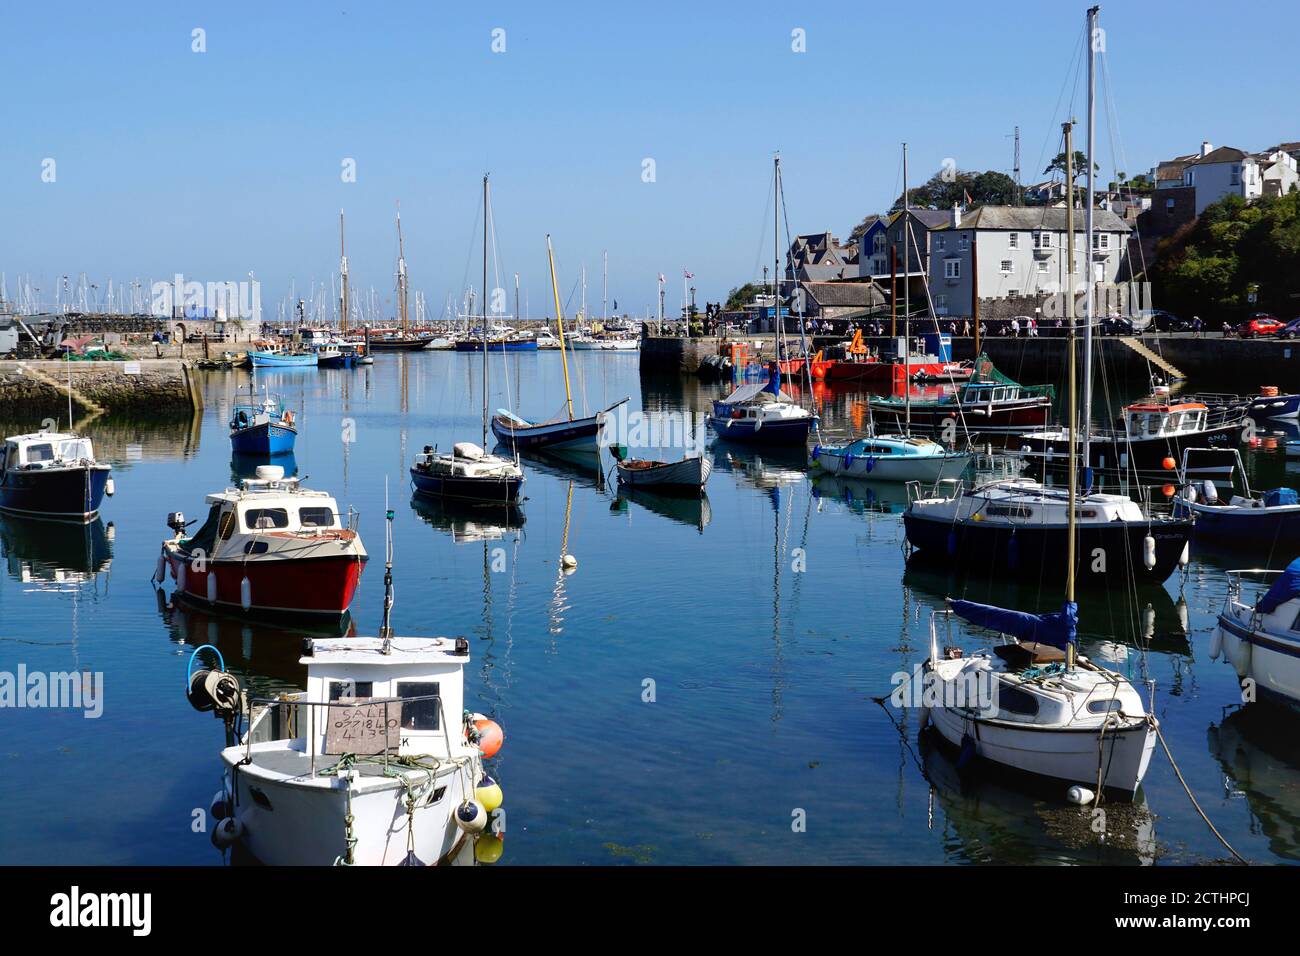 Brixham, Devon, UK. September 14, 2020. Tourists and holidaymakers on the Quayside browse the beautiful inner and outer harbours at Brixham in Devon, Stock Photo